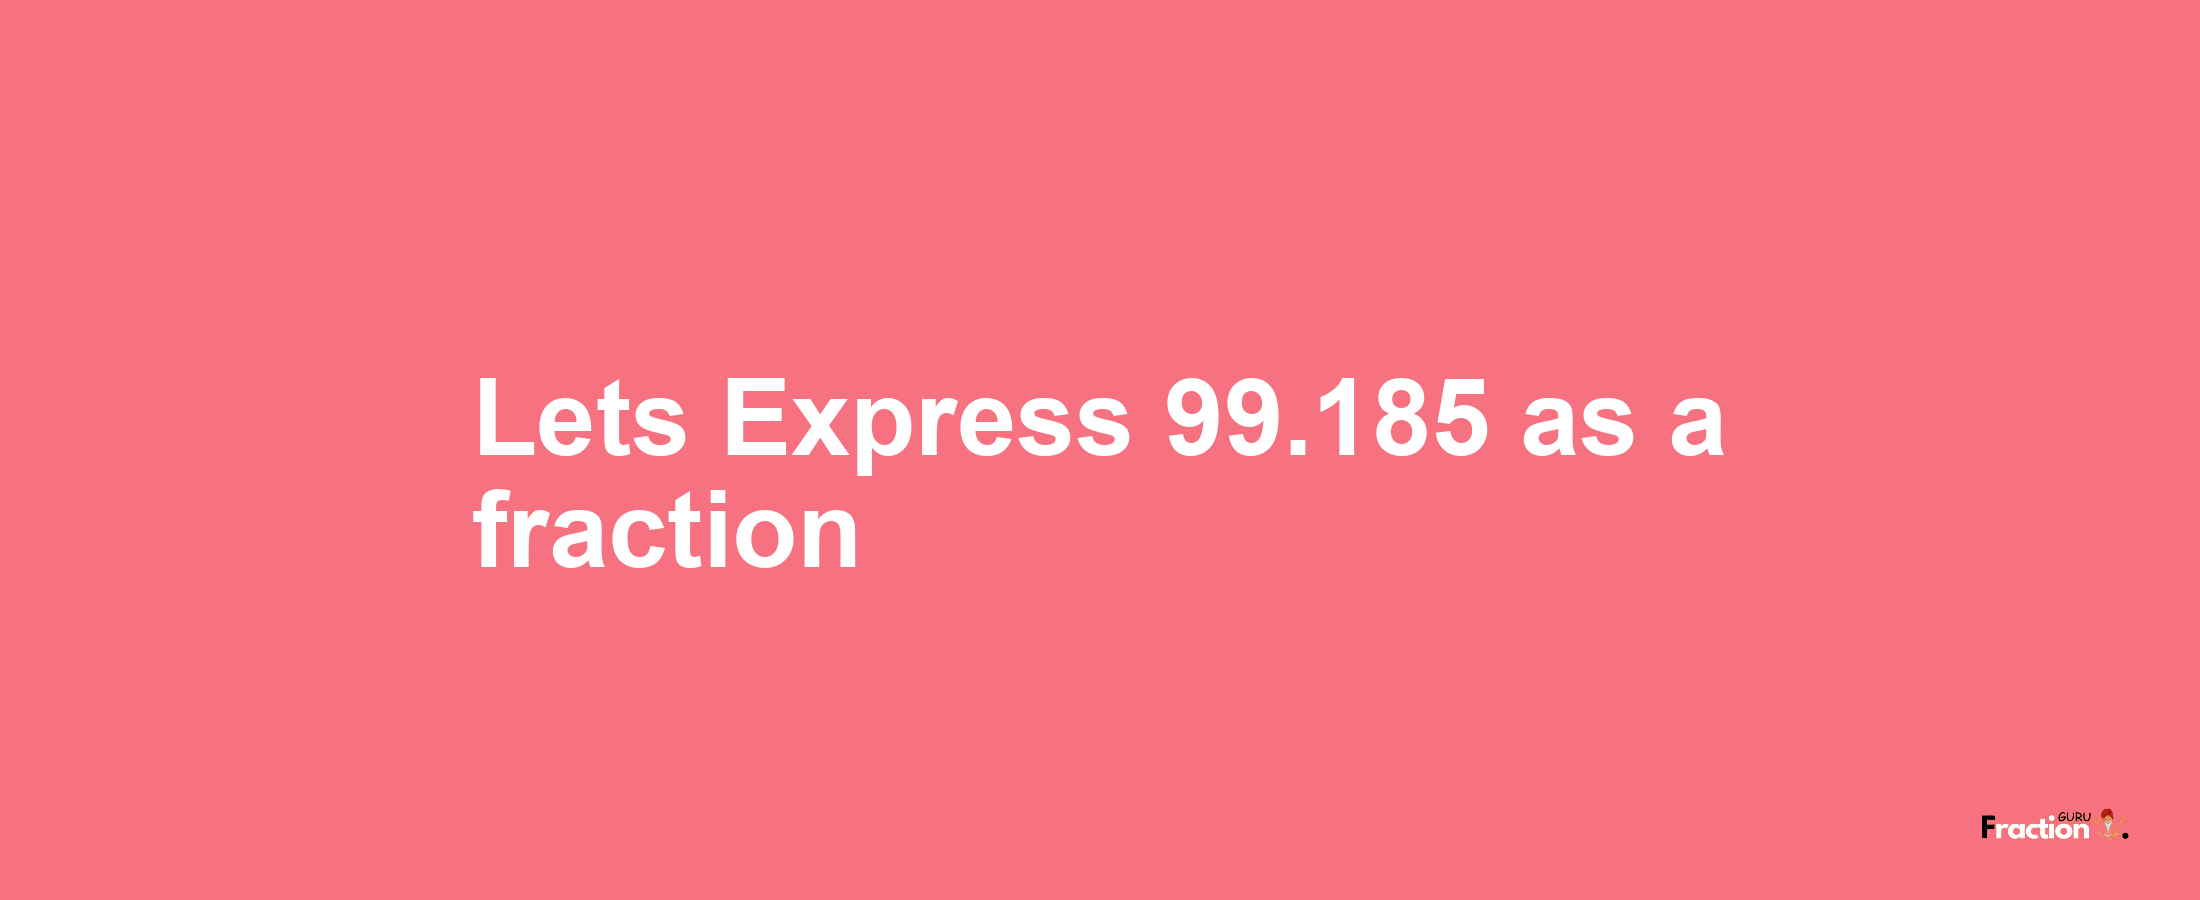 Lets Express 99.185 as afraction